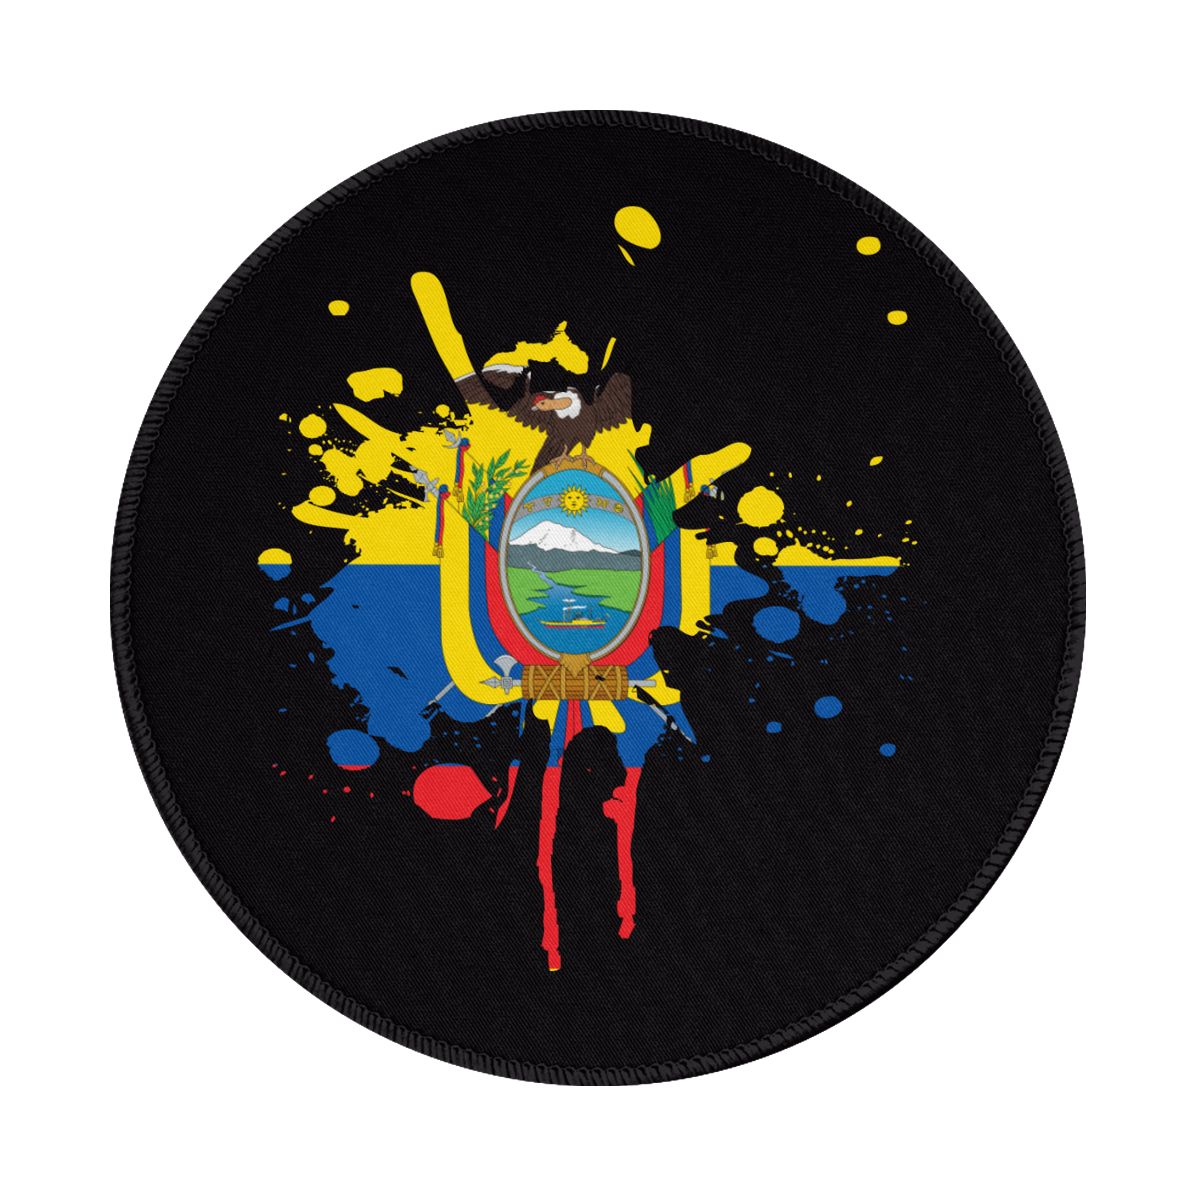 Ecuador Ink Spatter Waterproof Round Mouse Pad for Wireless Mouse